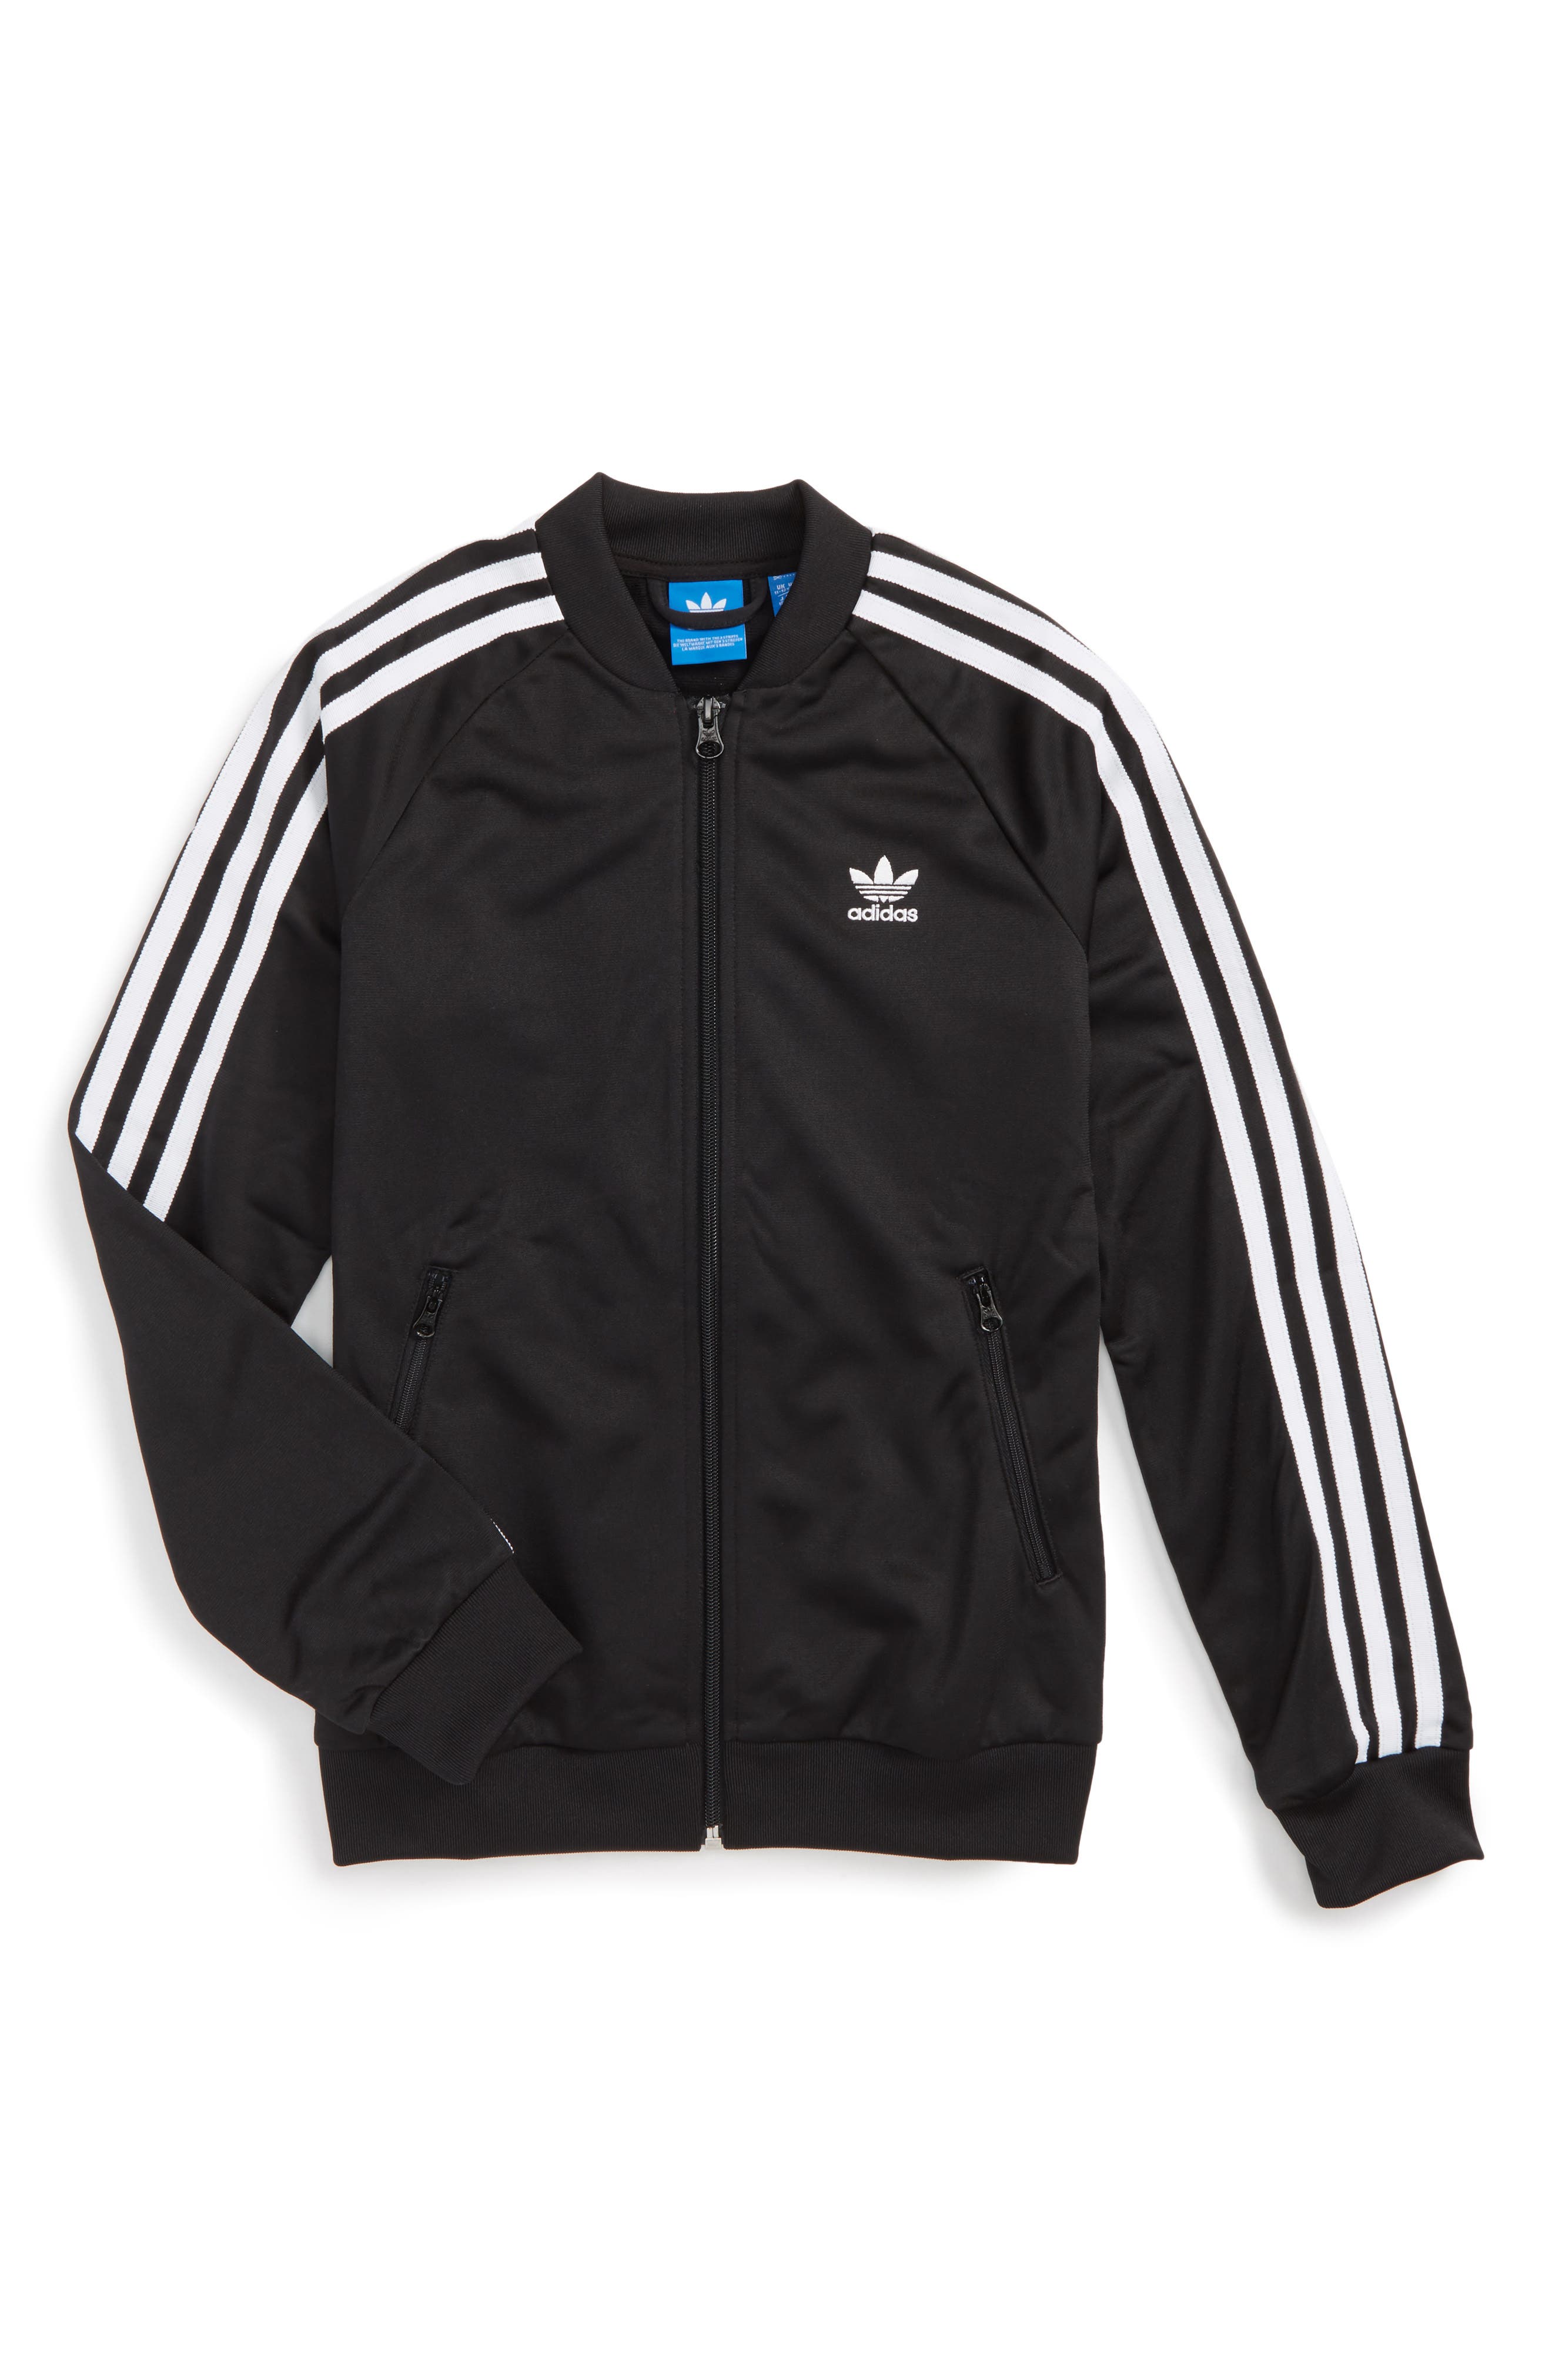 adidas jackets for sale in india